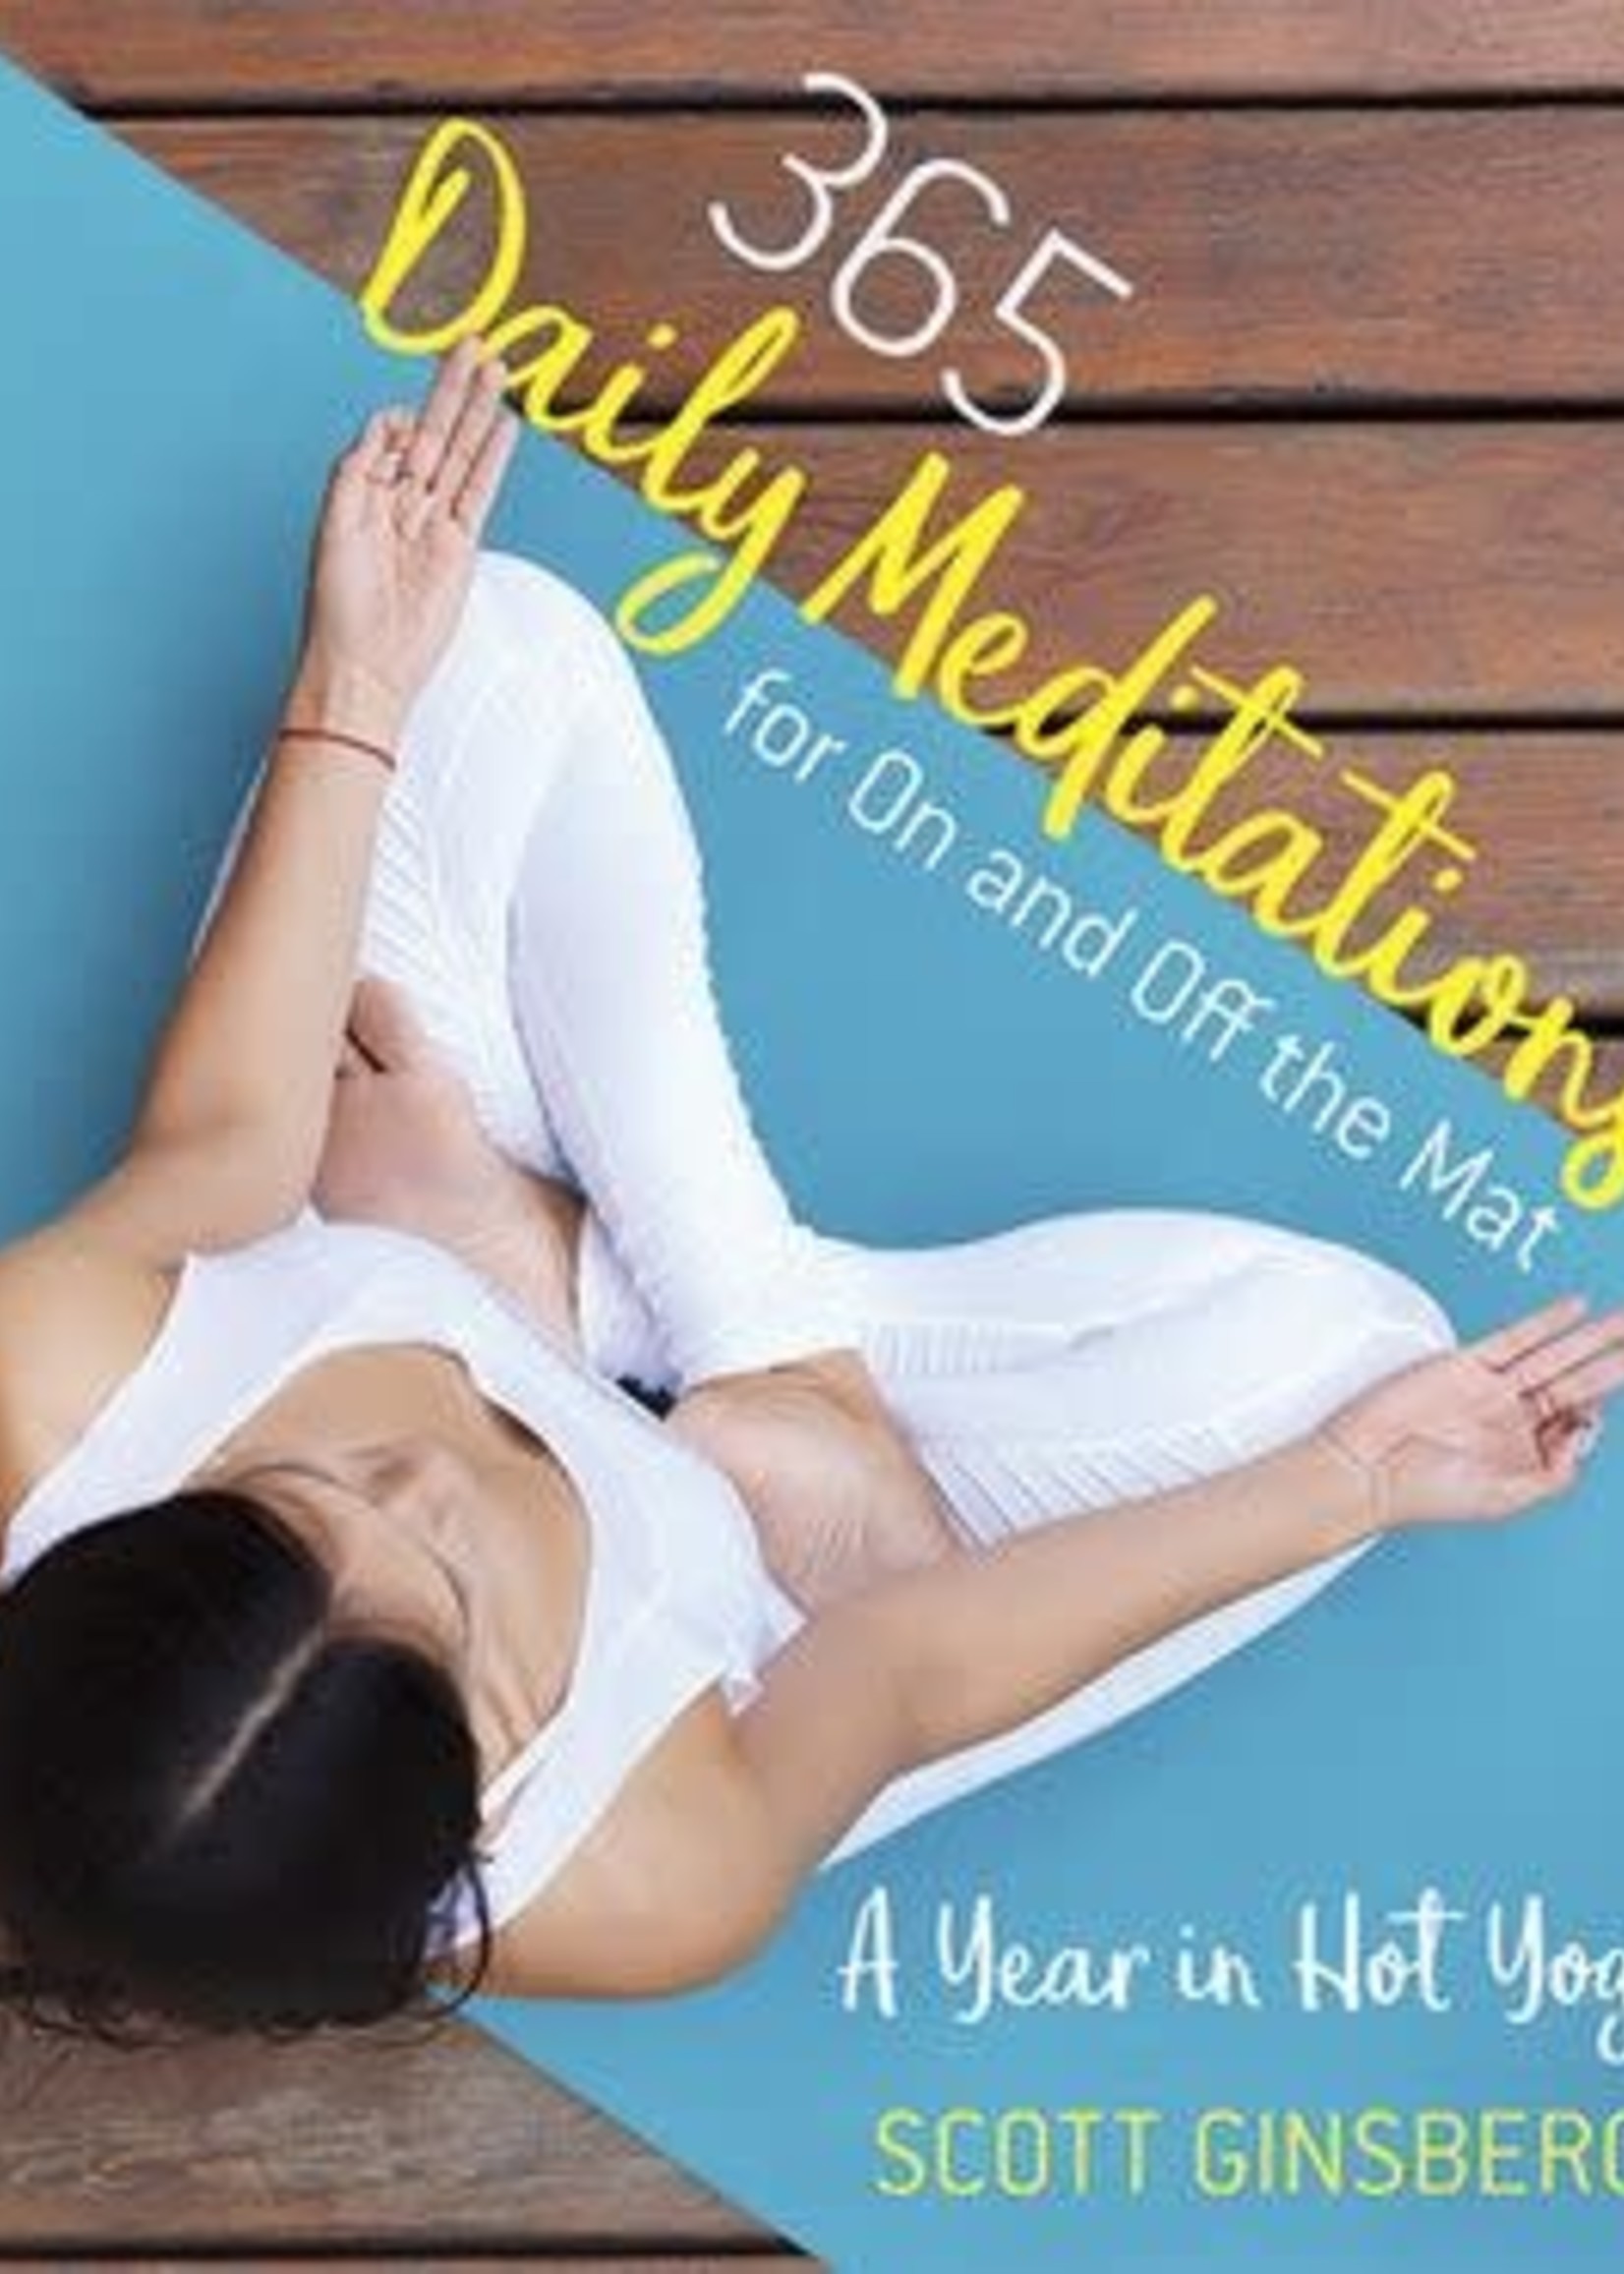 365 Daily Meditations for On and Off the Mat: A Year in Hot Yoga by Scott Ginsberg